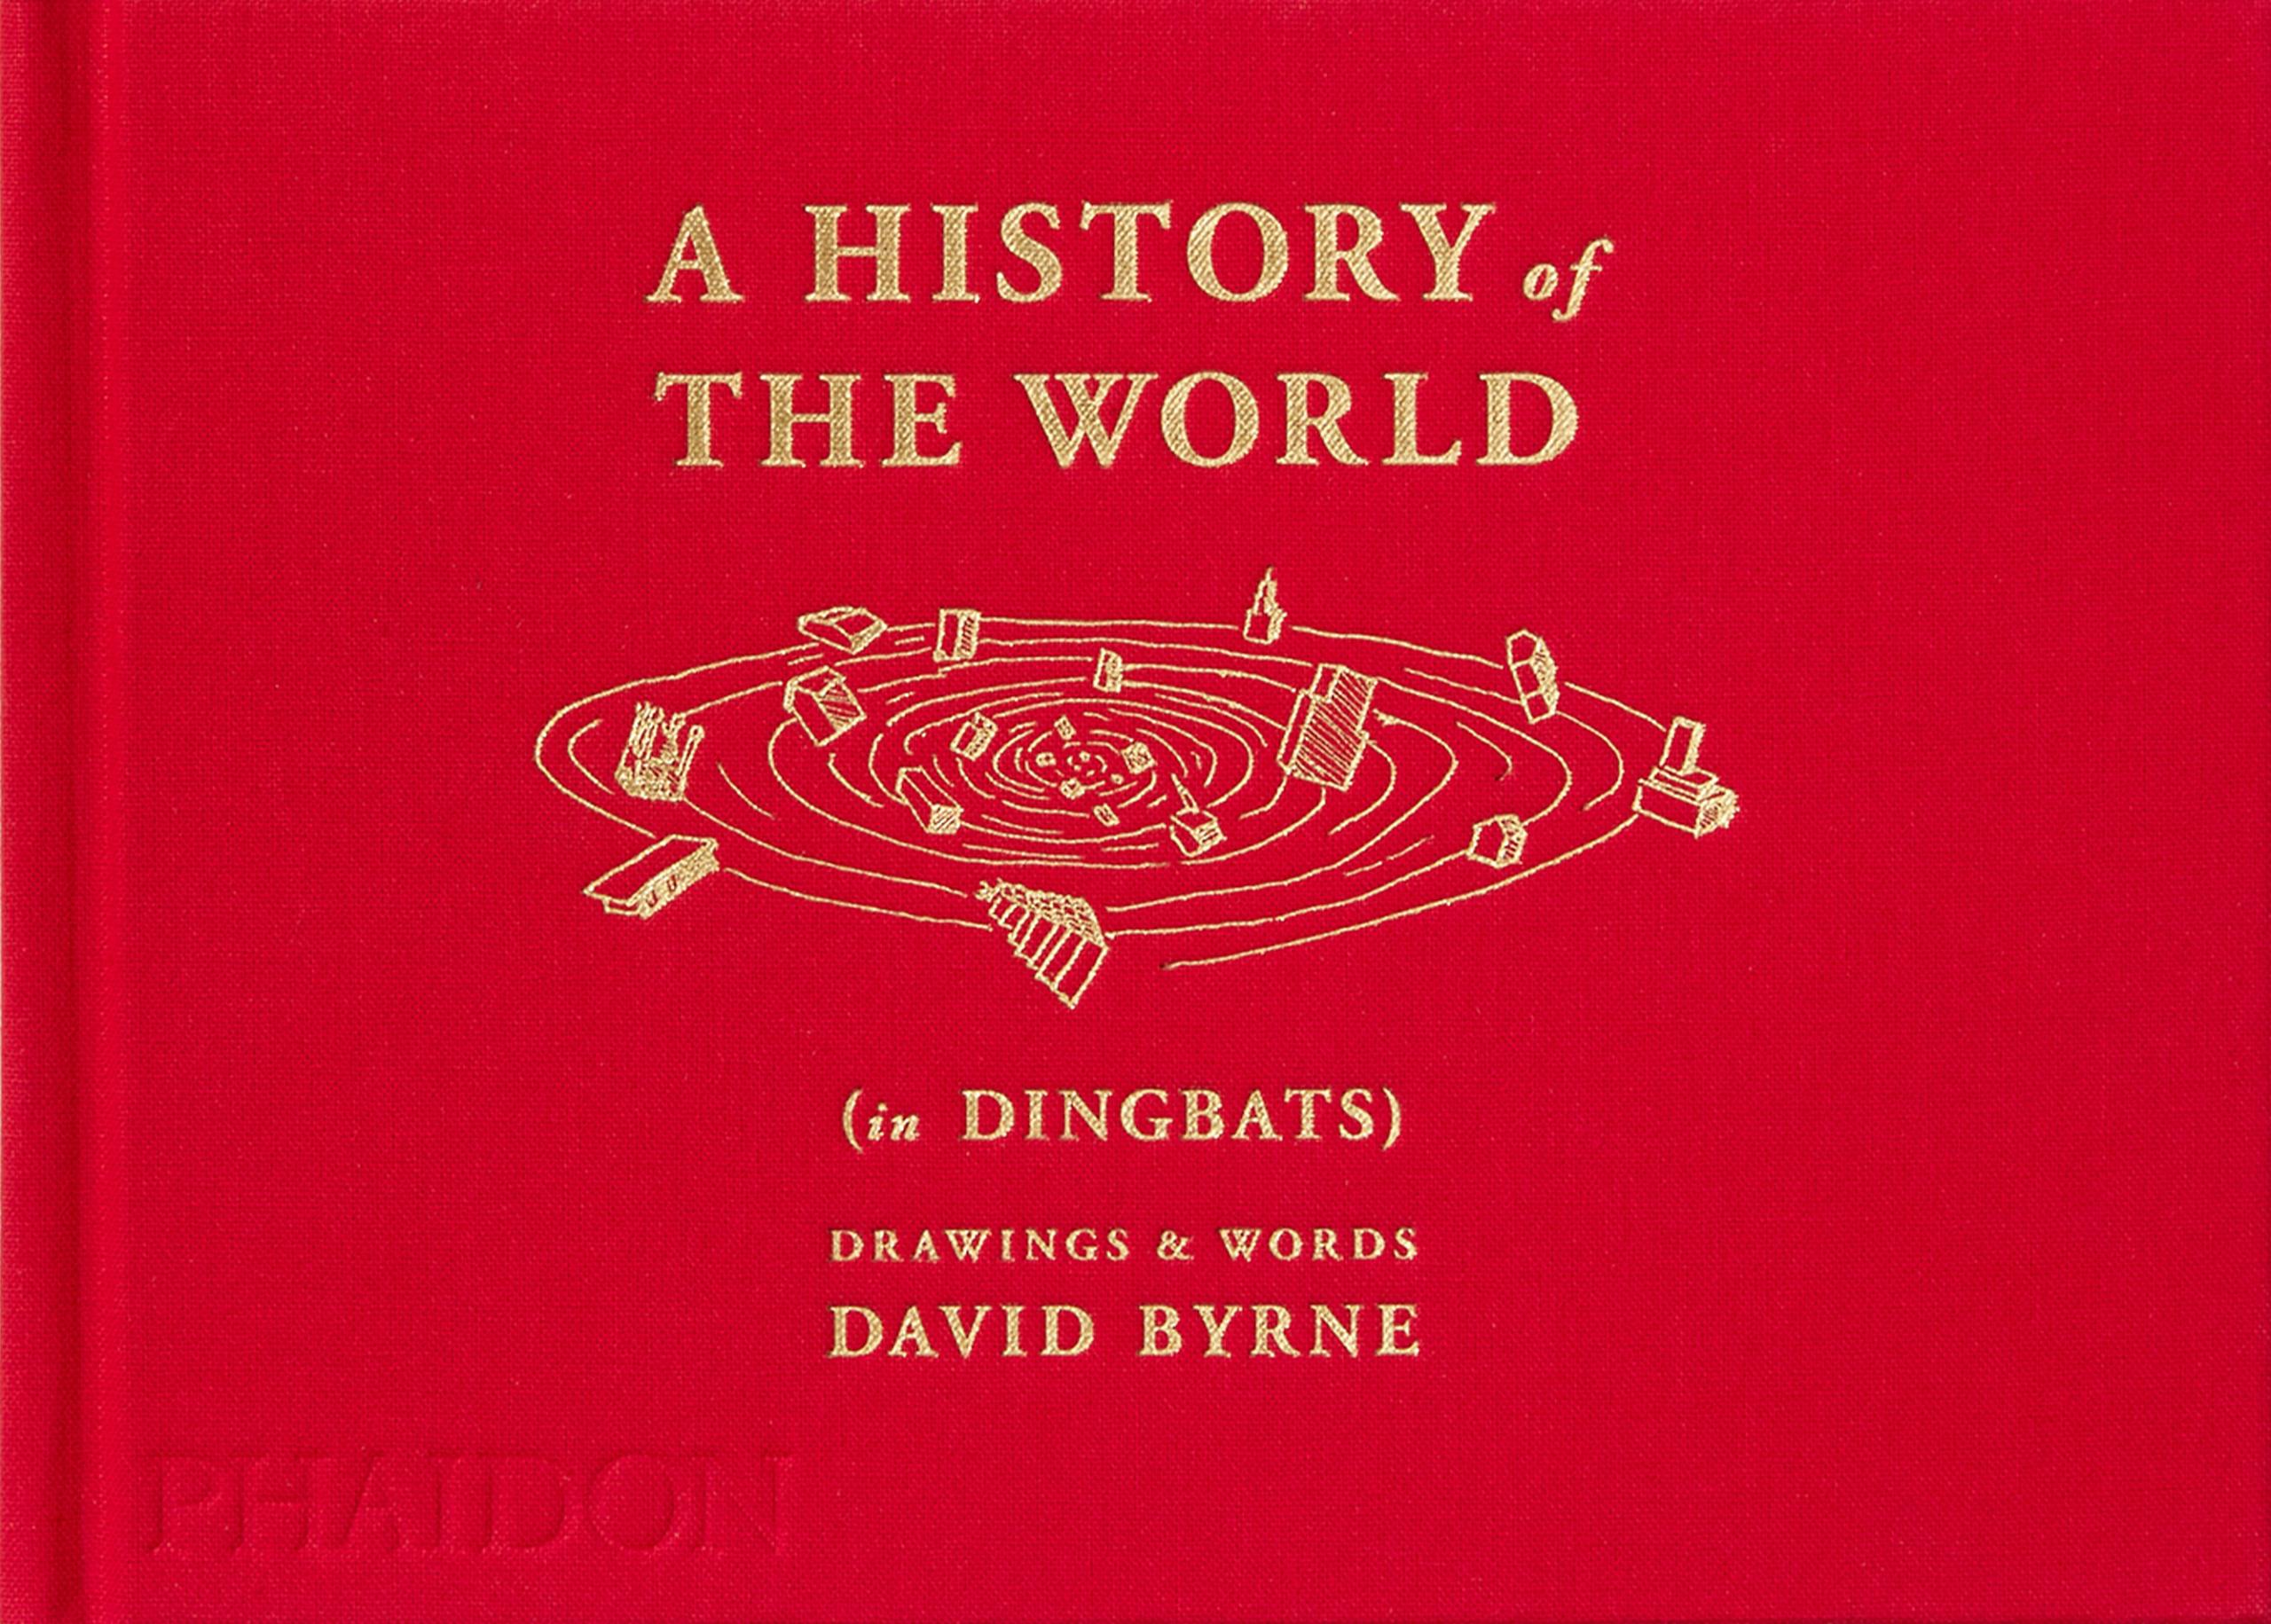 A History of the World (in Dingbats) by David Byrne